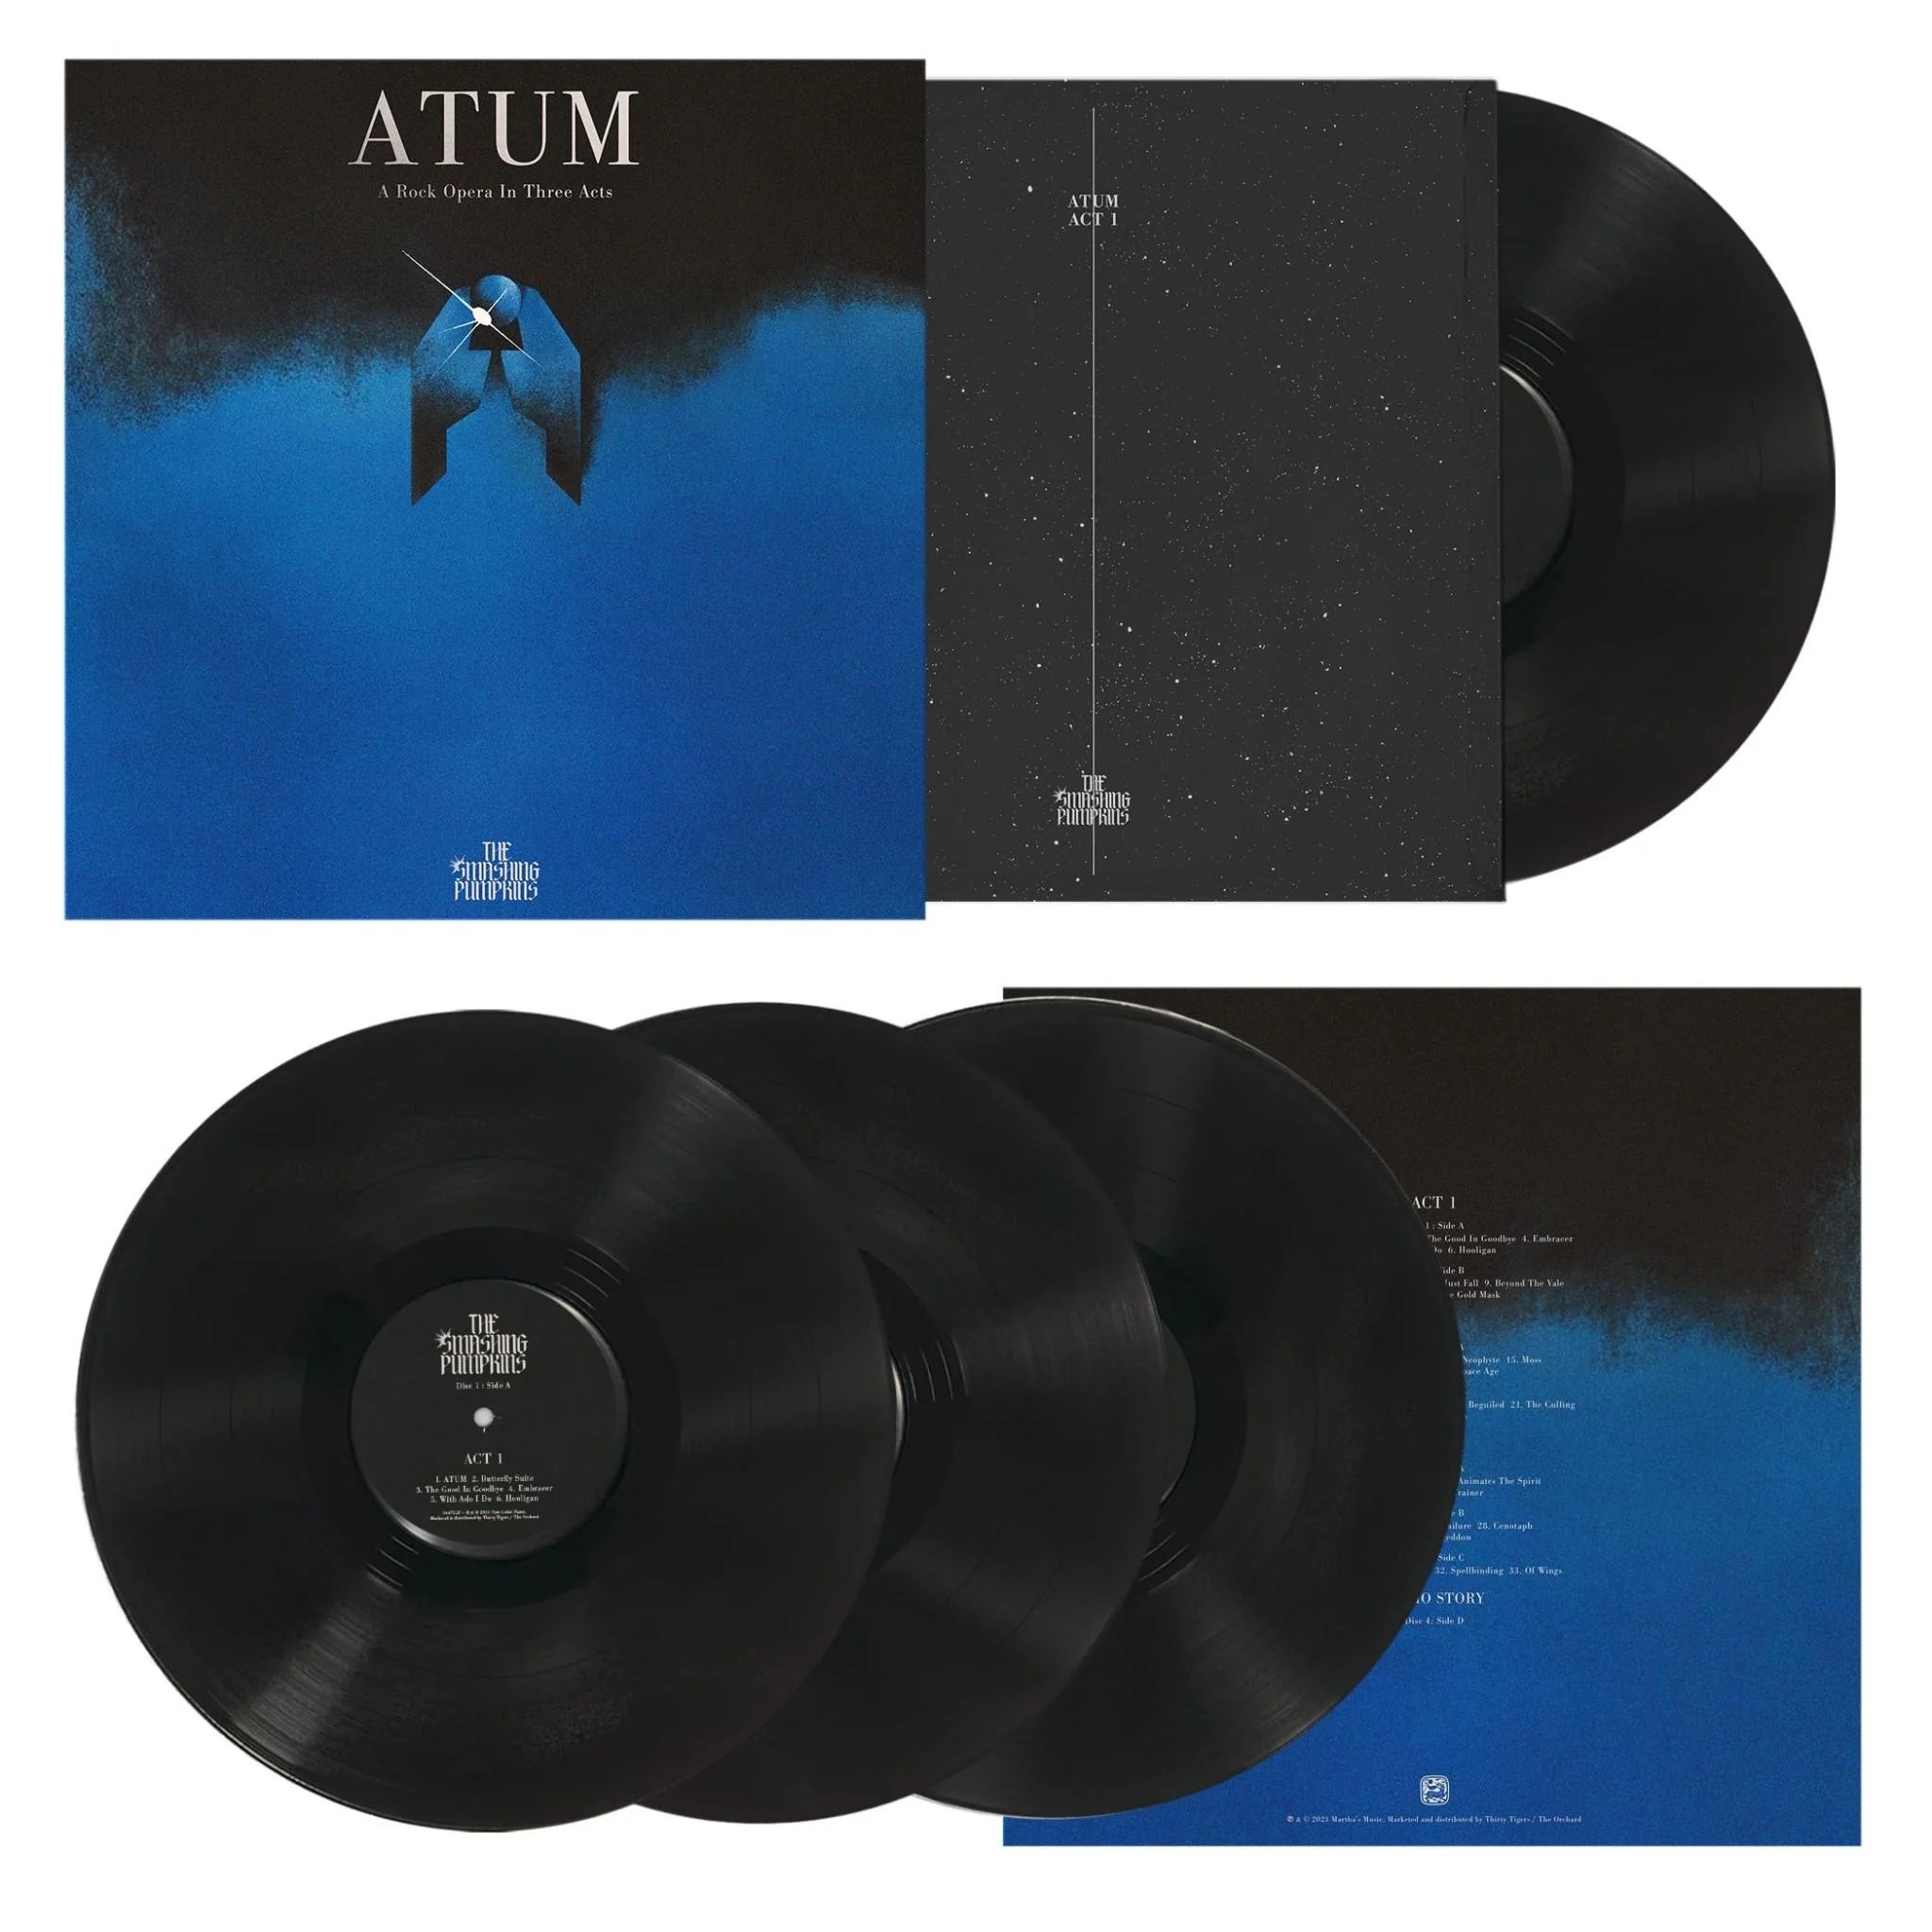 ATUM - A Rock Opera in Three Acts: Limited Edition Vinyl 4LP